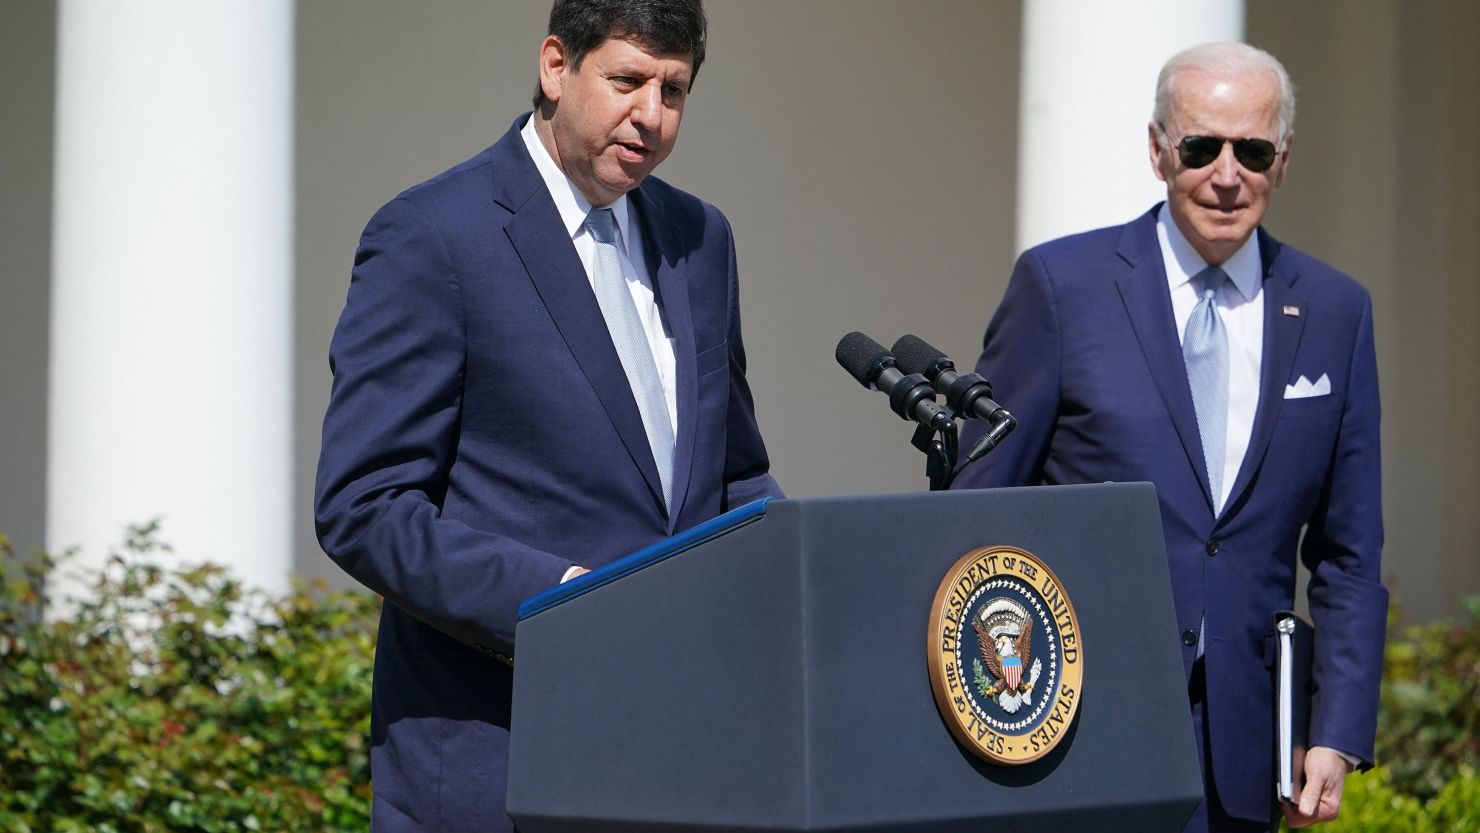 President Joe Biden listens as Steve Dettelbach, nominee for Director of the Bureau of Alcohol, Tobacco, Firearms, and Explosives, speaks on measures to combat gun violence from the Rose Garden of the White House.